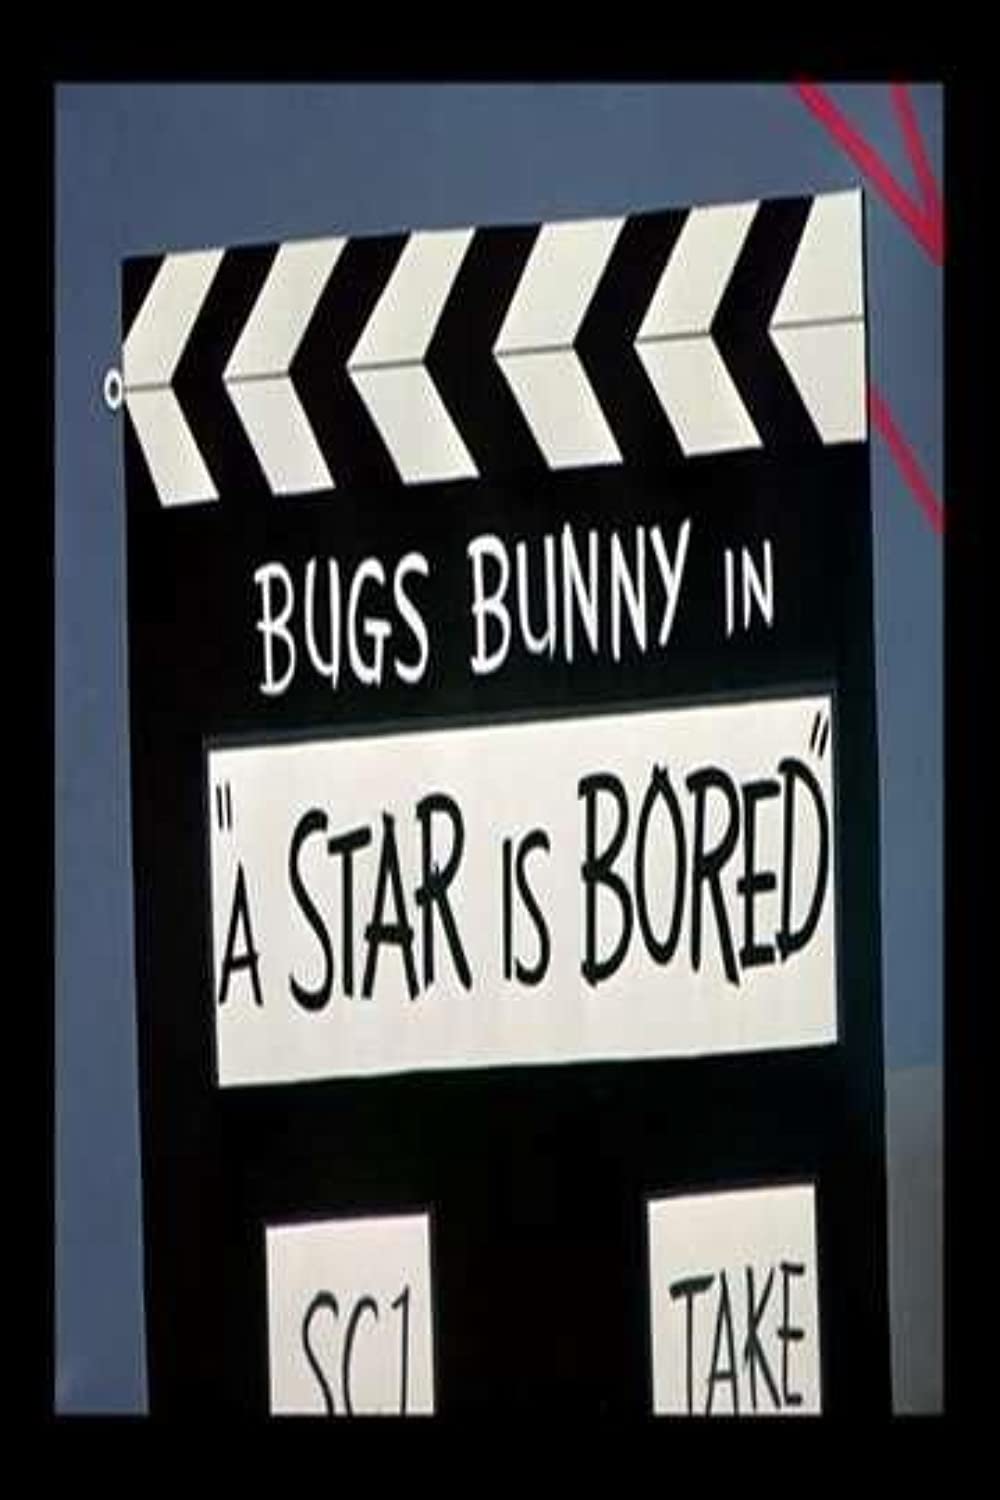 A Star Is Bored (Short 1956)